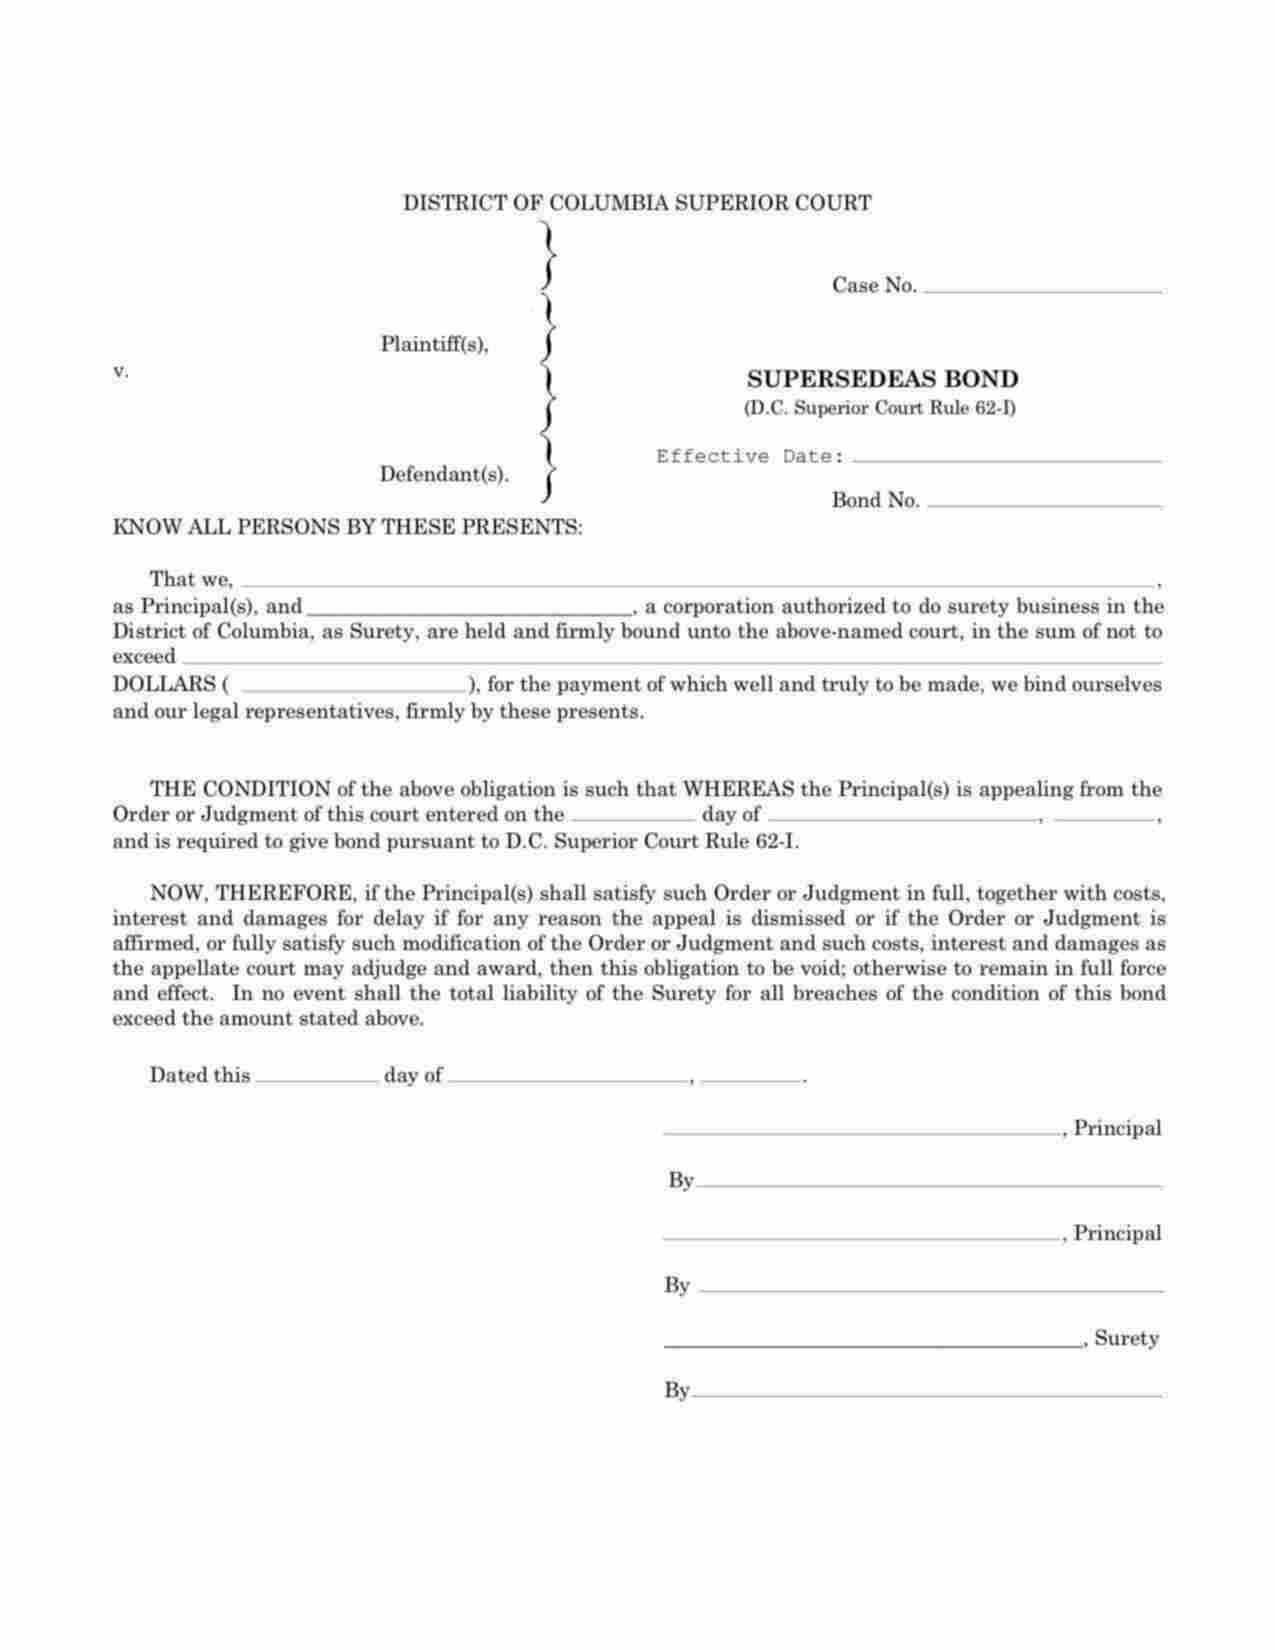 District of Columbia Supersedeas Bond Form